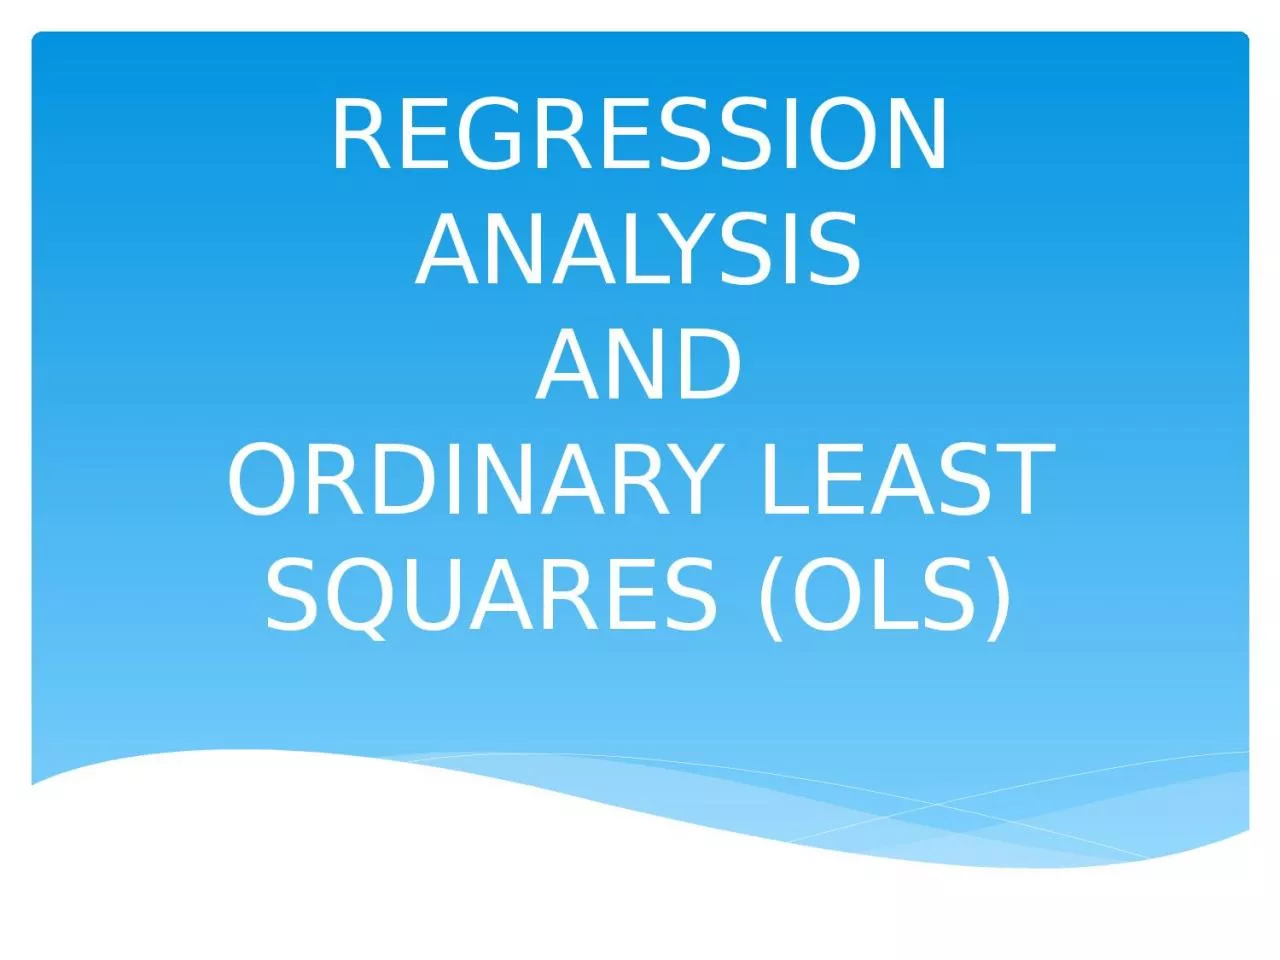 REGRESSION ANALYSIS AND ORDINARY LEAST SQUARES (OLS)